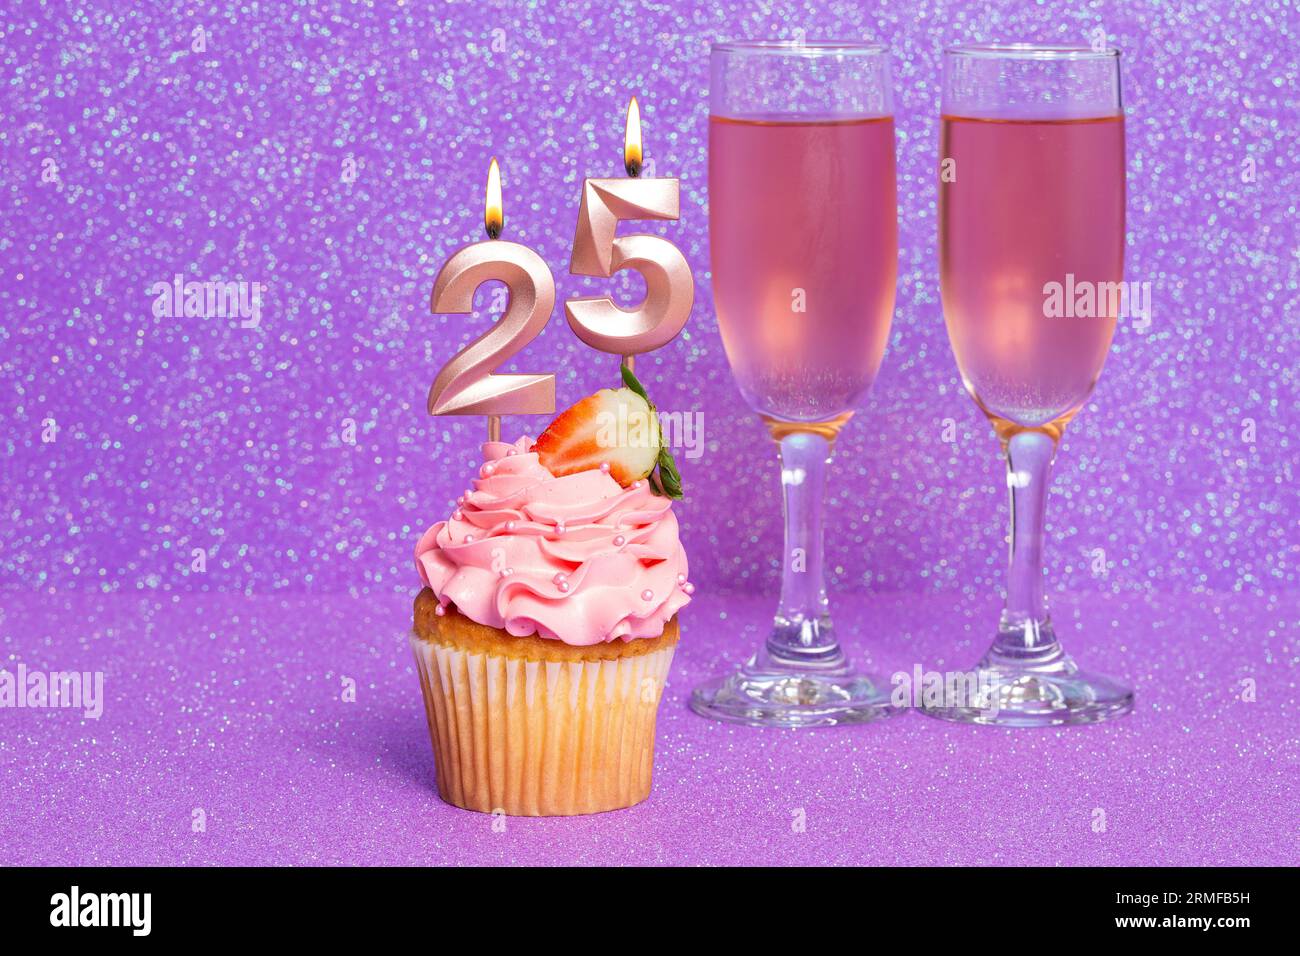 https://c8.alamy.com/comp/2RMFB5H/cupcake-with-number-and-glasses-with-wine-for-birthday-or-anniversary-celebration-number-twenty-five-2RMFB5H.jpg